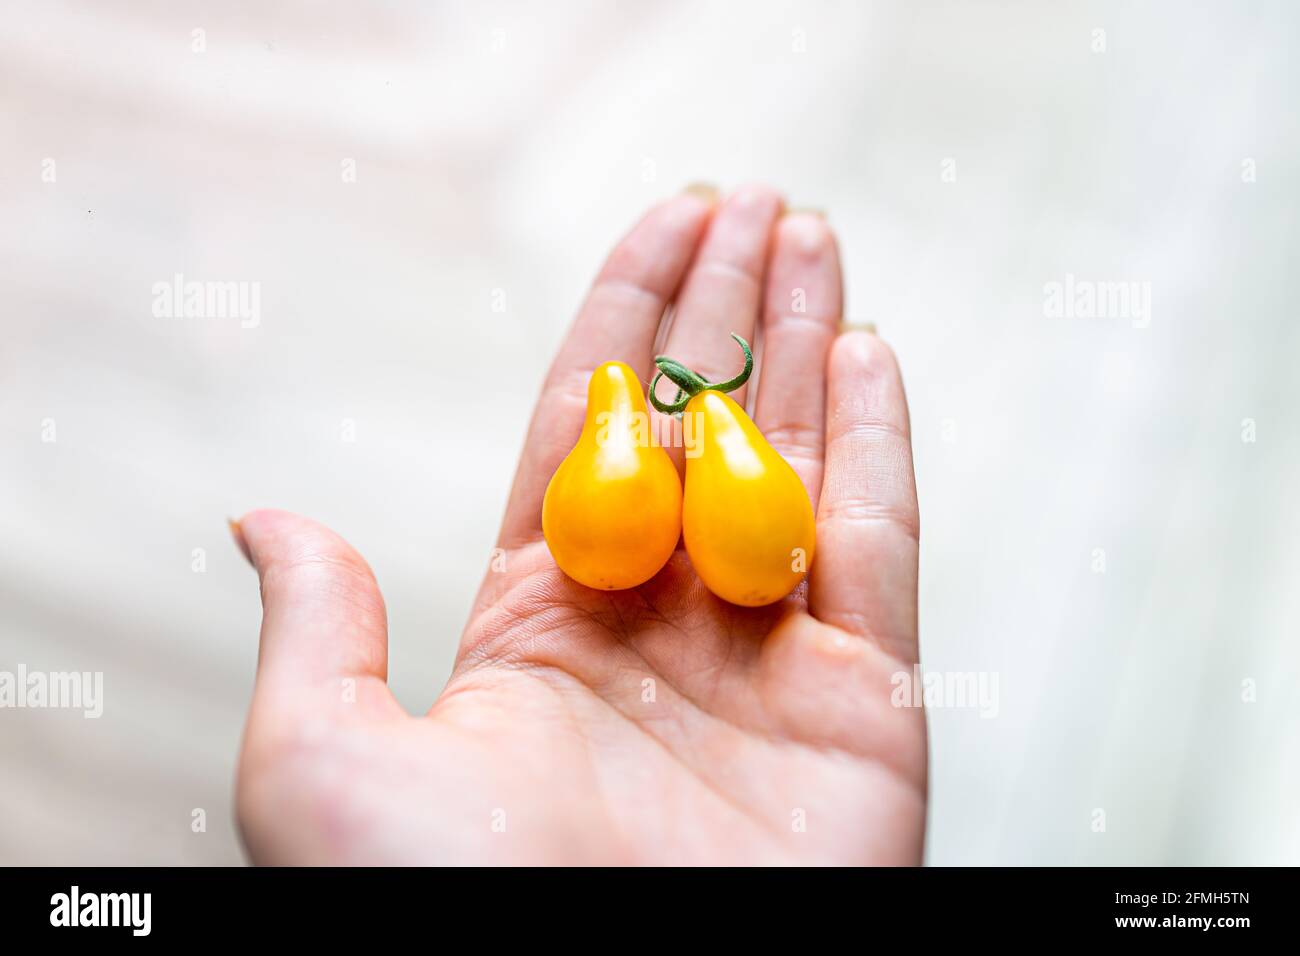 Macro closeup of unique variety of small cherry yellow pear tomatoes harvested from garden with woman holding fruit in palm of hand Stock Photo